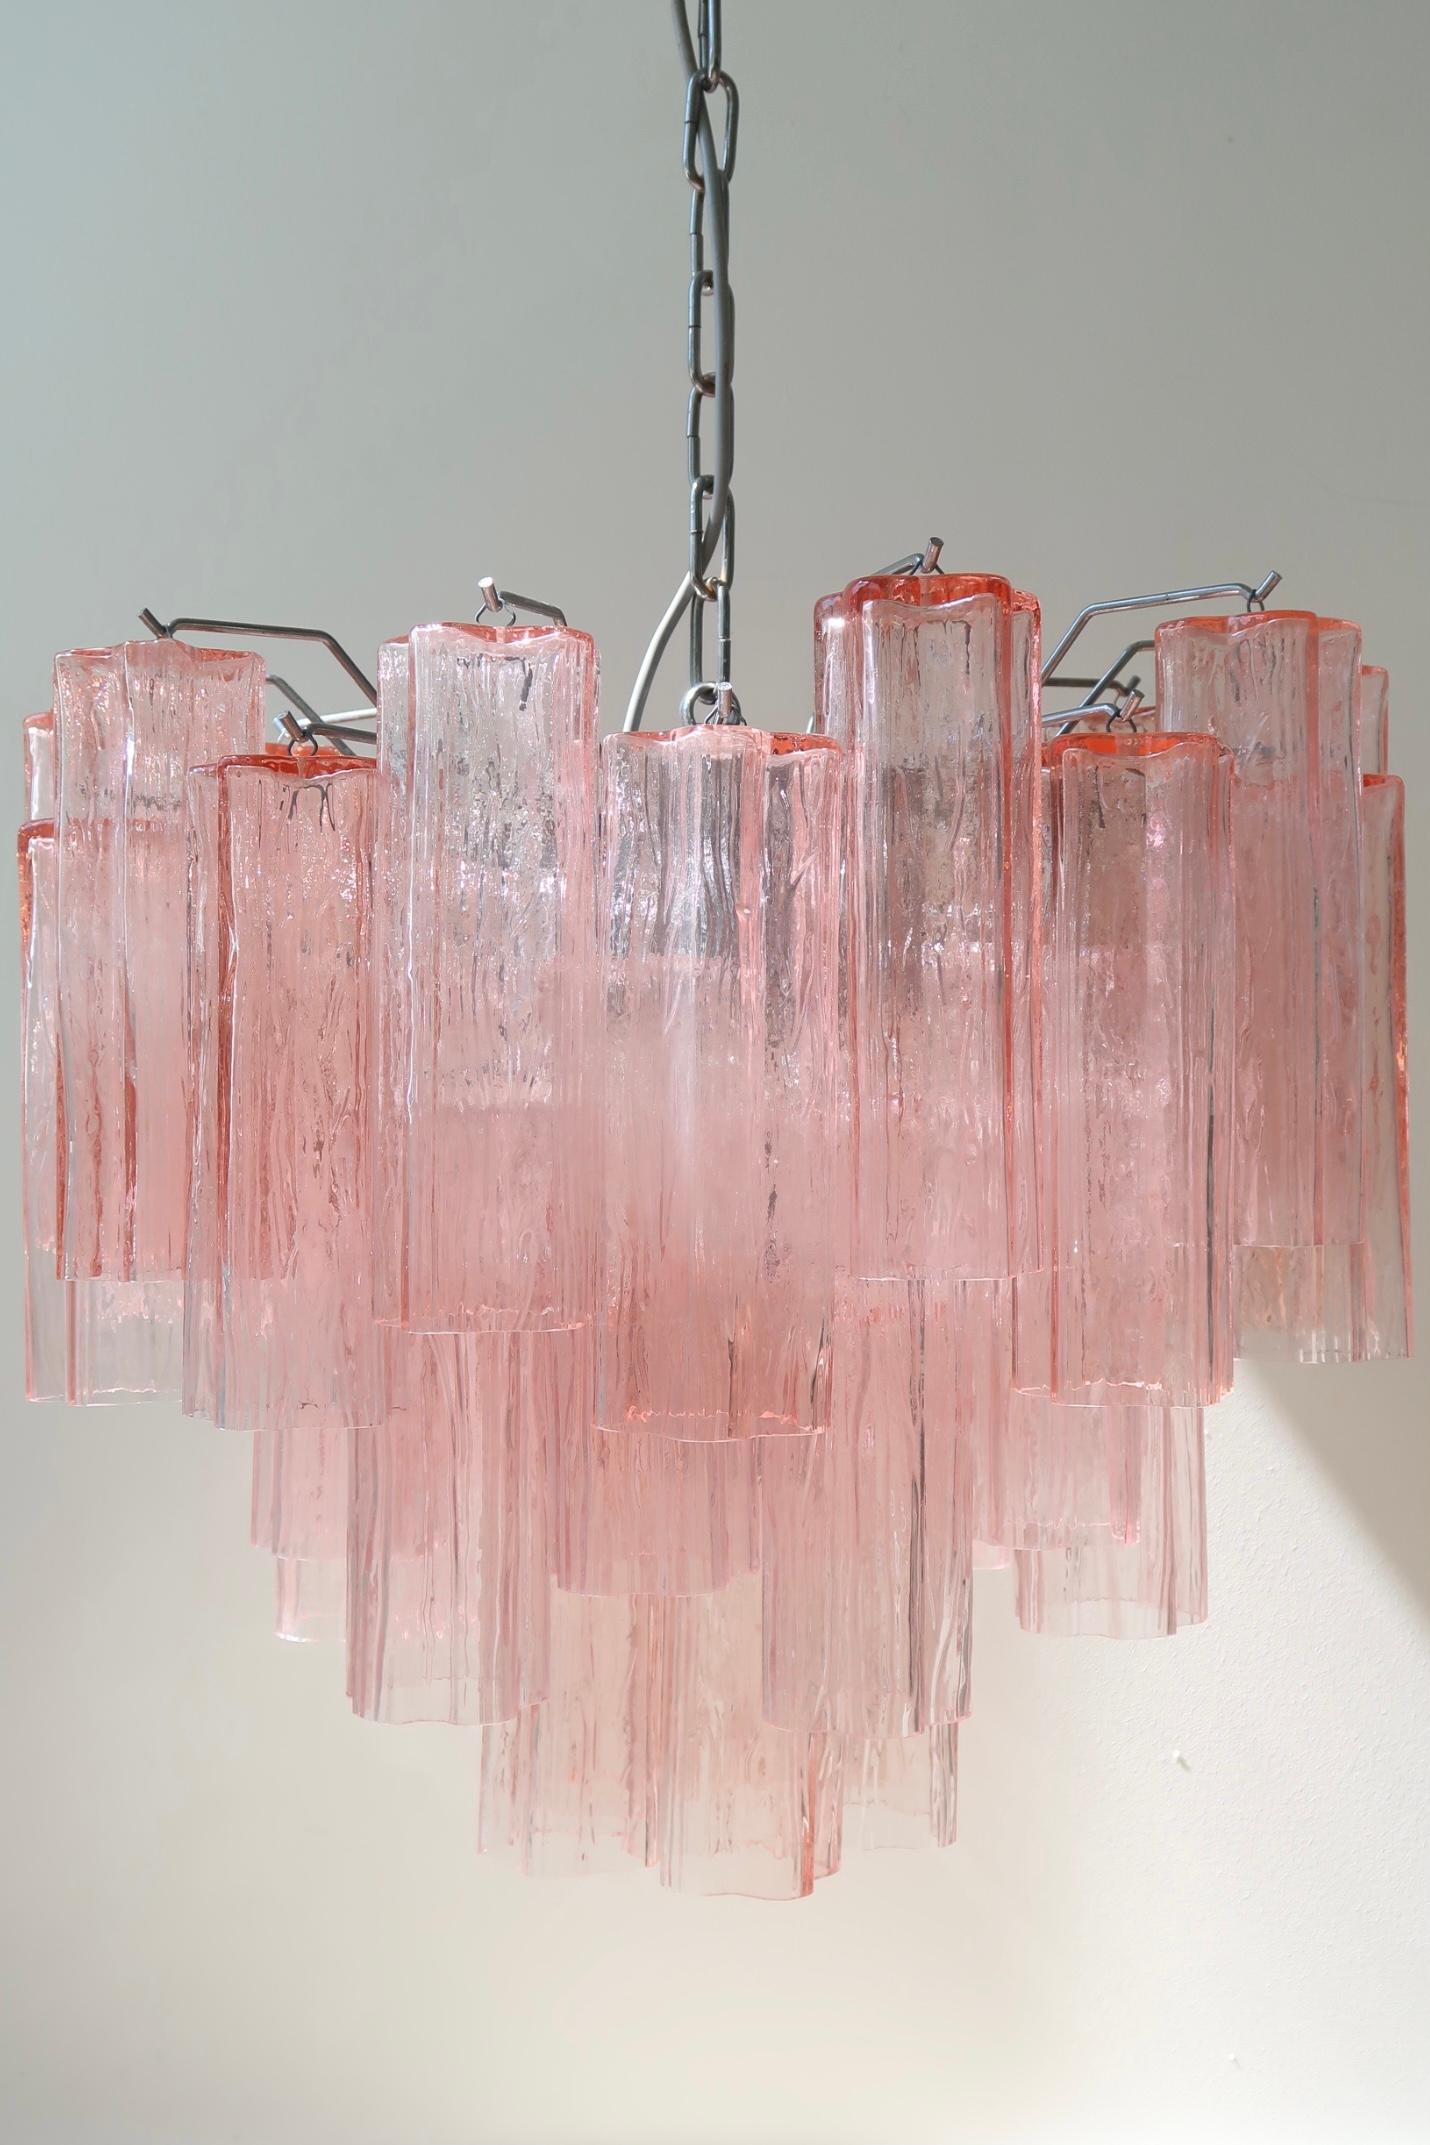 Beautiful vintage Murano Tronchi chandelier.
The chandelier consists of 34 mouth-blown tronchi prisms / glass rods in a transparent soft pink shade set on a frame. It has a 5 x E27 socket and provides plenty of light. Handmade in Italy. Chain